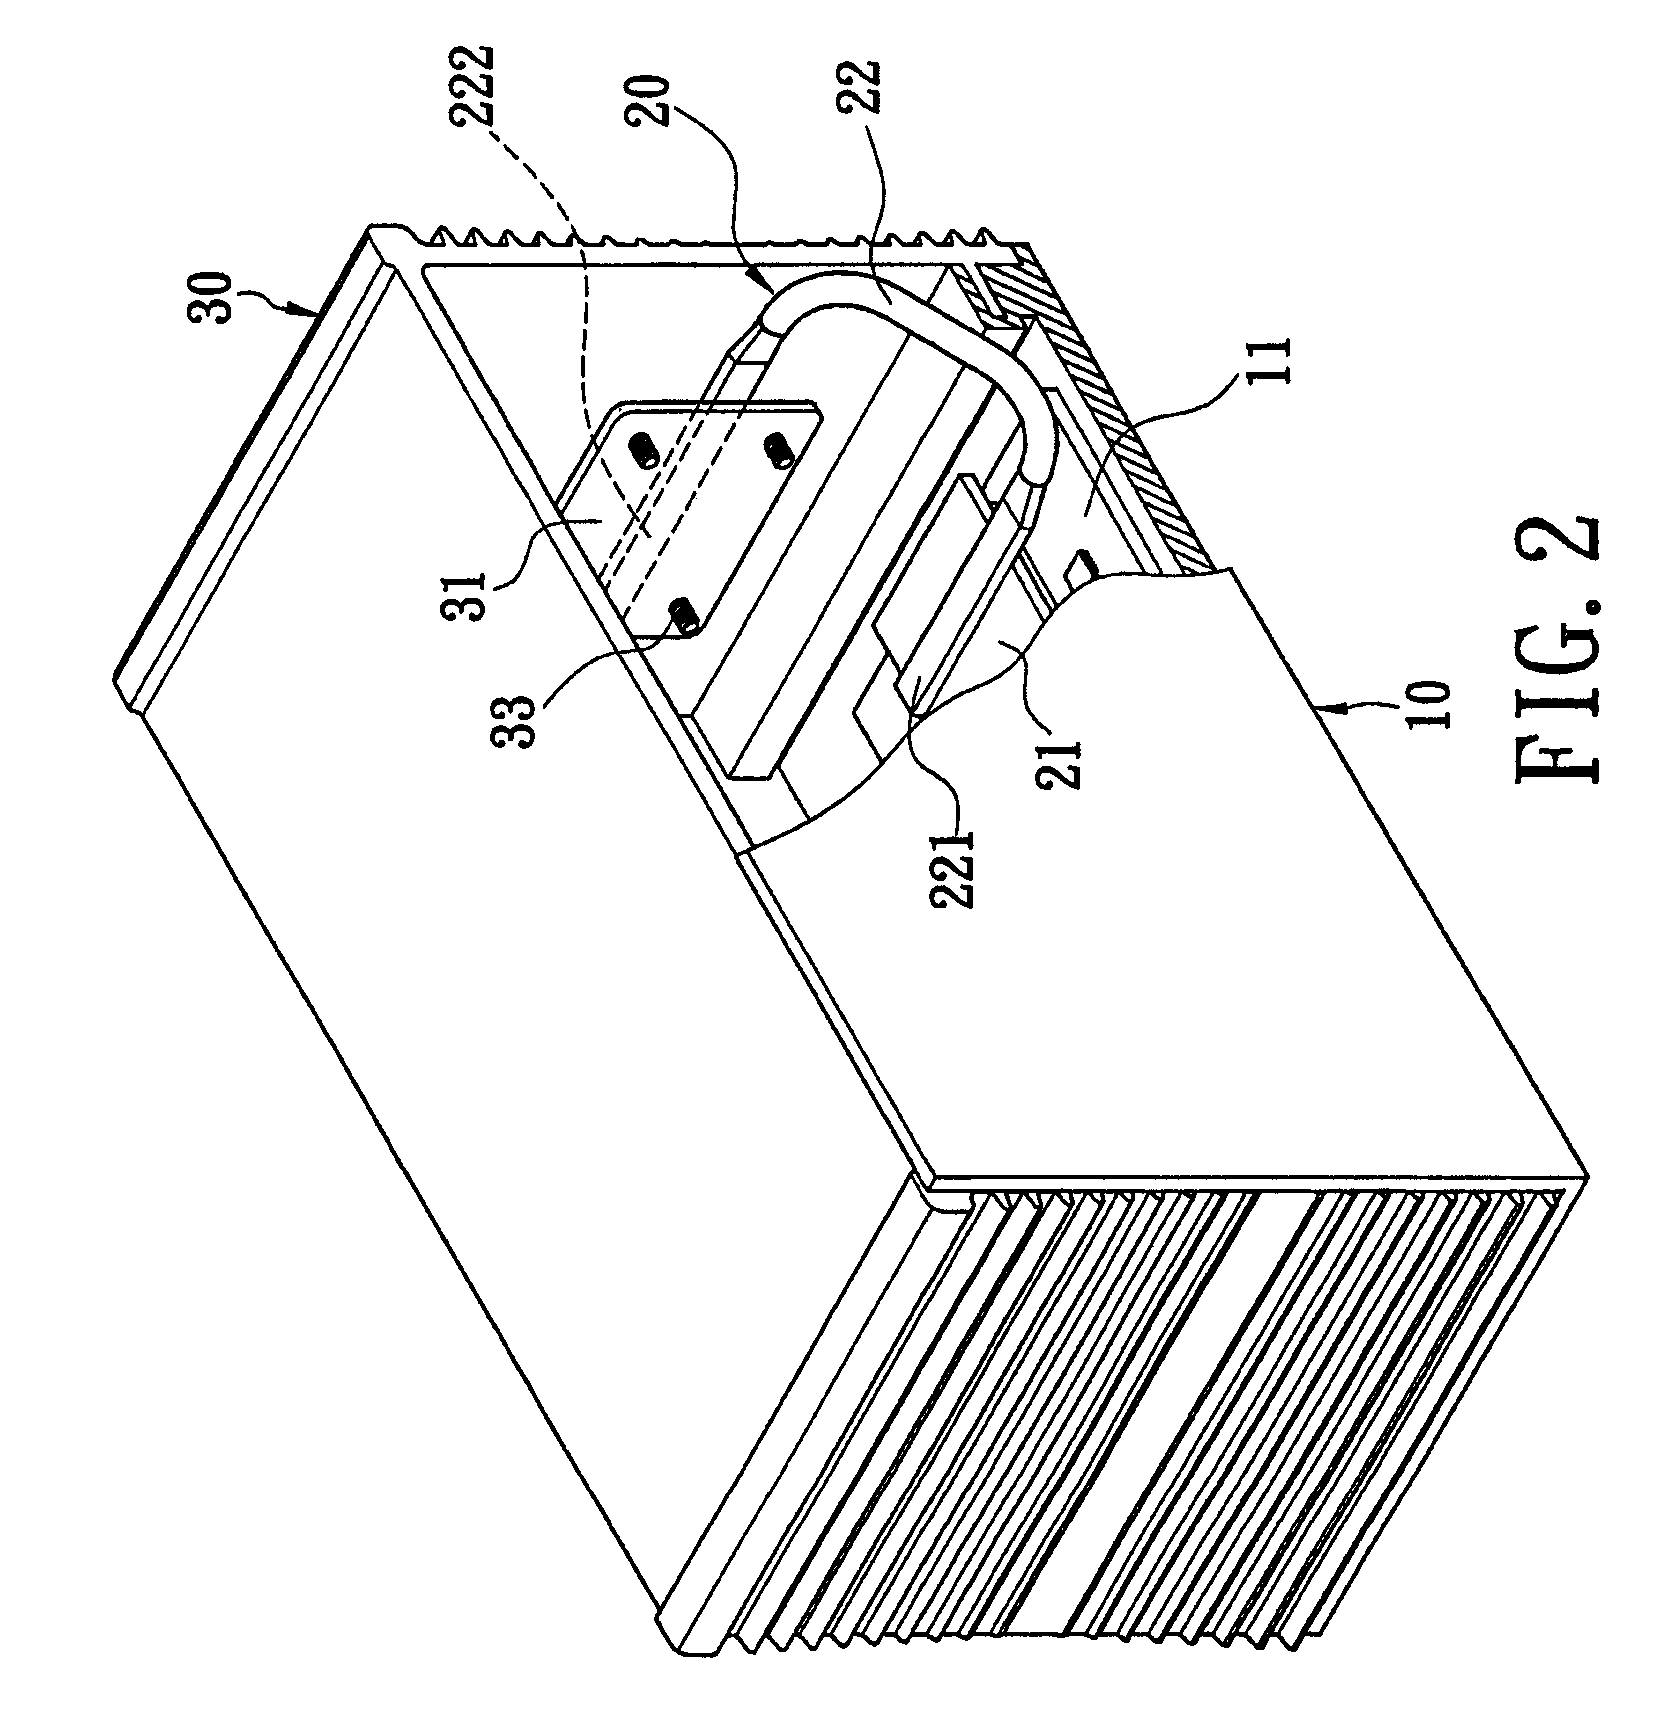 Heat-dissipating casing structure